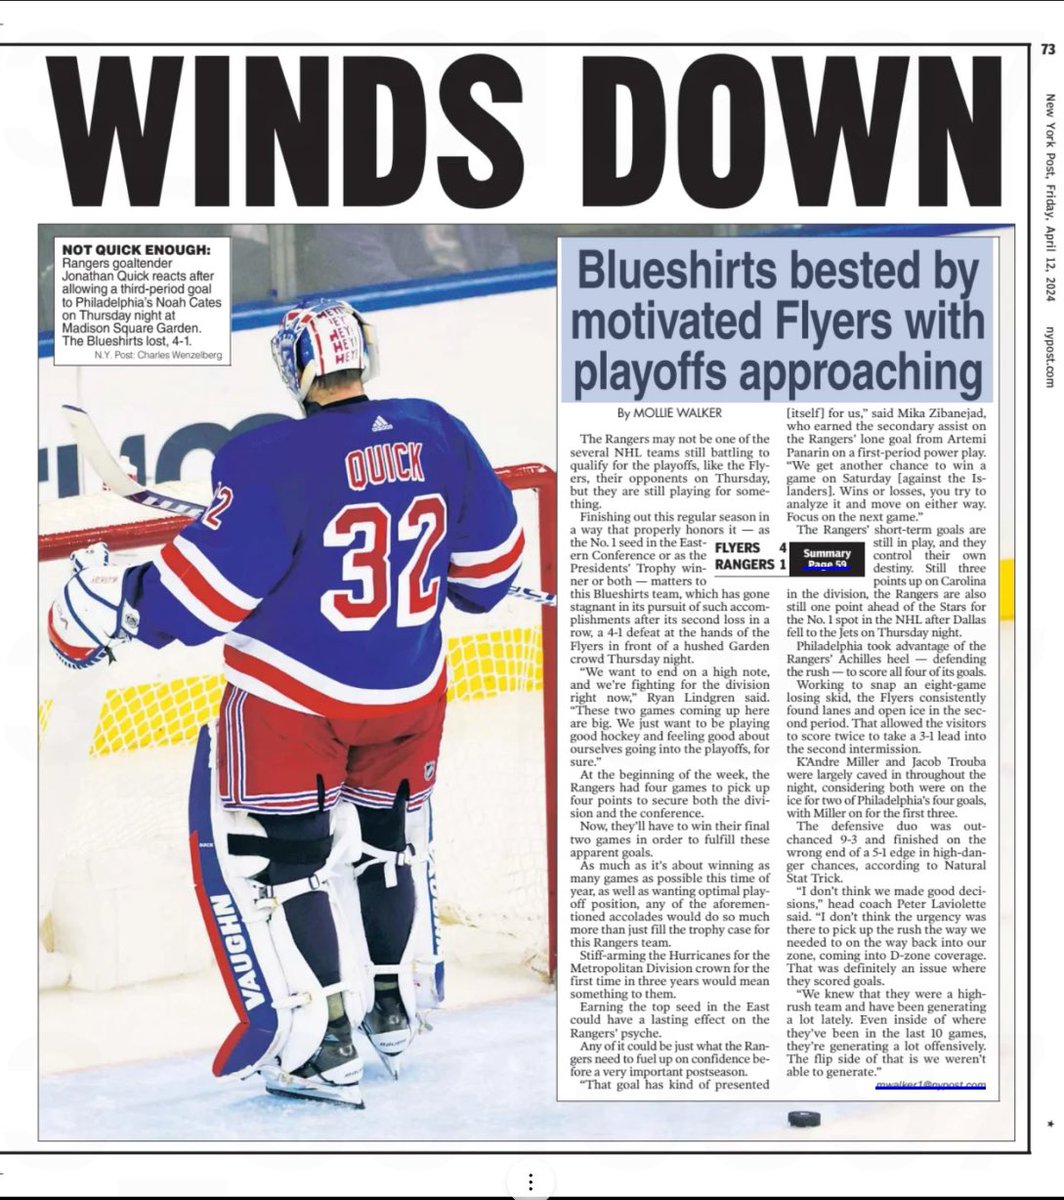 #NYR spread in today’s @nypost ahead of practice⬇️ Rangers stalling in President’s Trophy race➡️ bit.ly/43TALFh Power play can’t offset lack of 5v5 scoring➡️ bit.ly/3JhwfqA Brooks: Straining Rangers jeopardizing ideal playoff scenario➡️ bit.ly/3PYHkR4